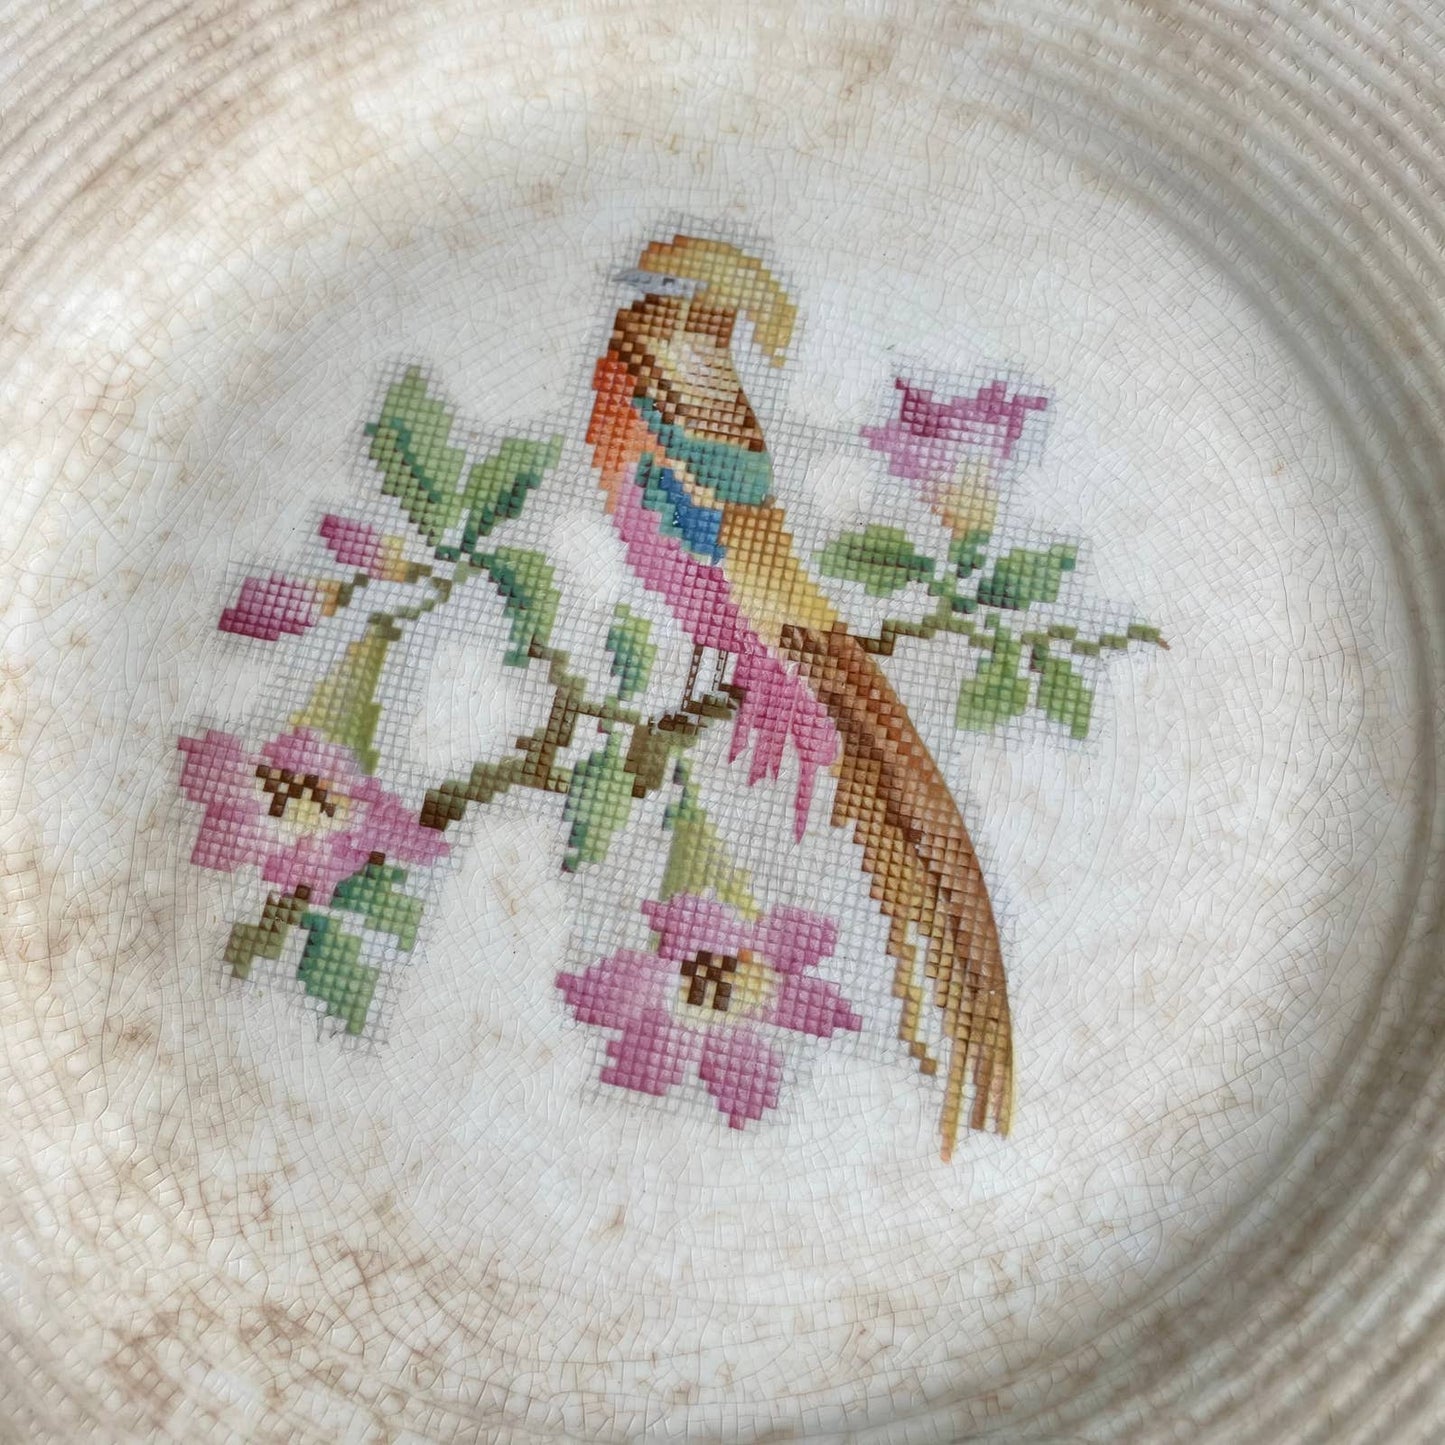 Antique Leigh Potters 1920s cross stitch bird dinner plate AS IS